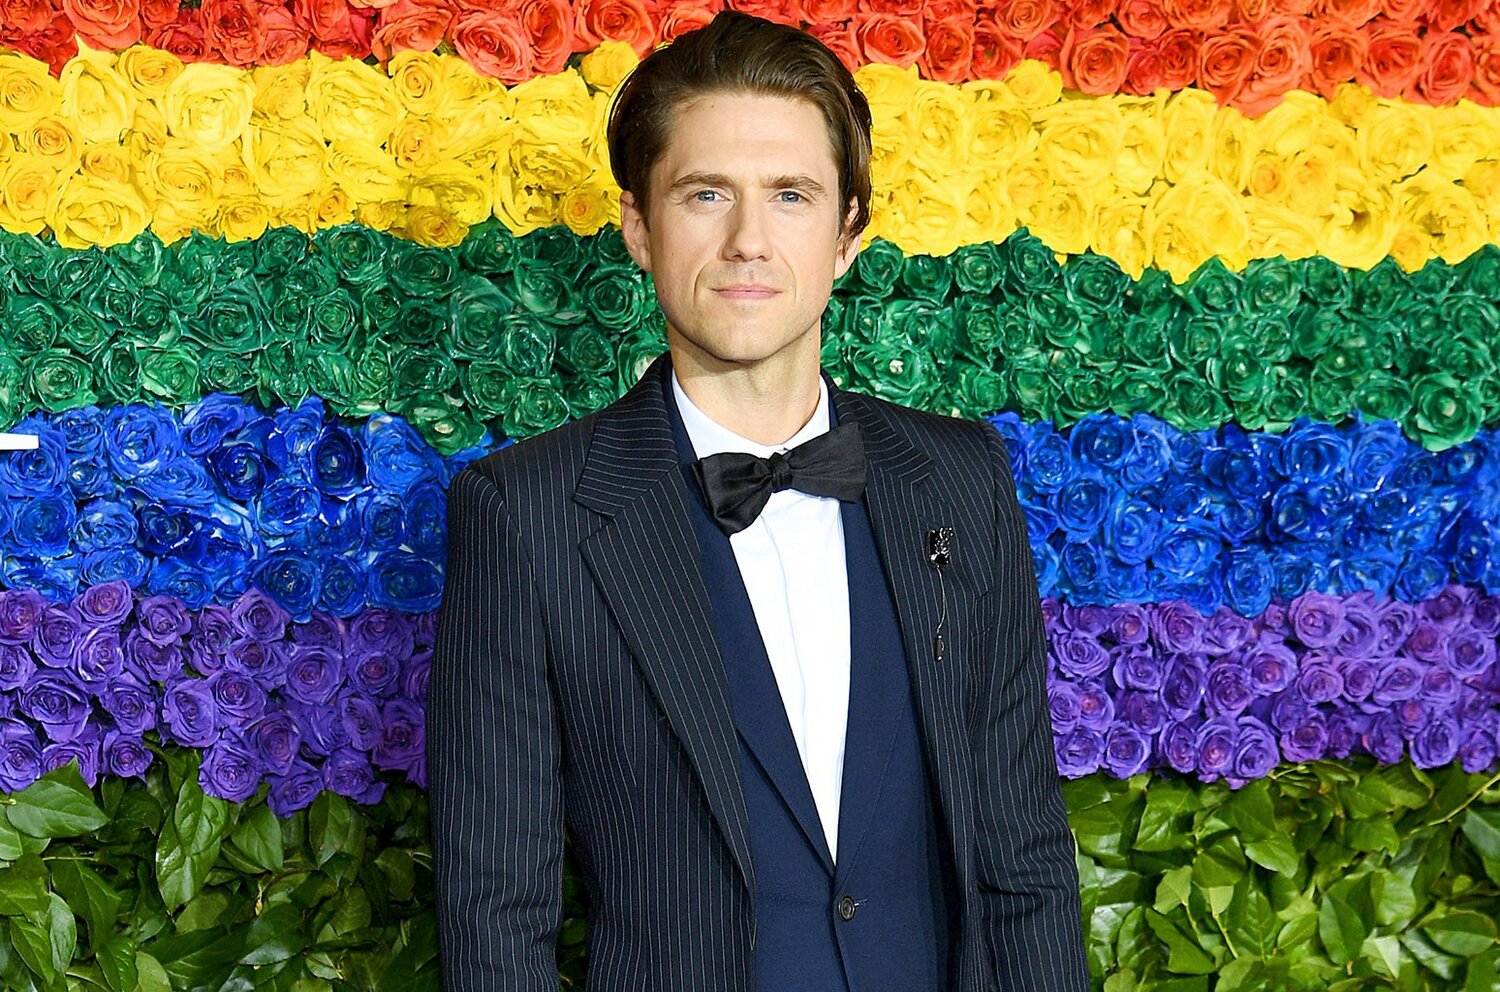 Aaron Tveit will perform to a sold-out crowd in the Mary D’Angelo Performing Arts Center on Wednesday, May 3, at 7:30 p.m.